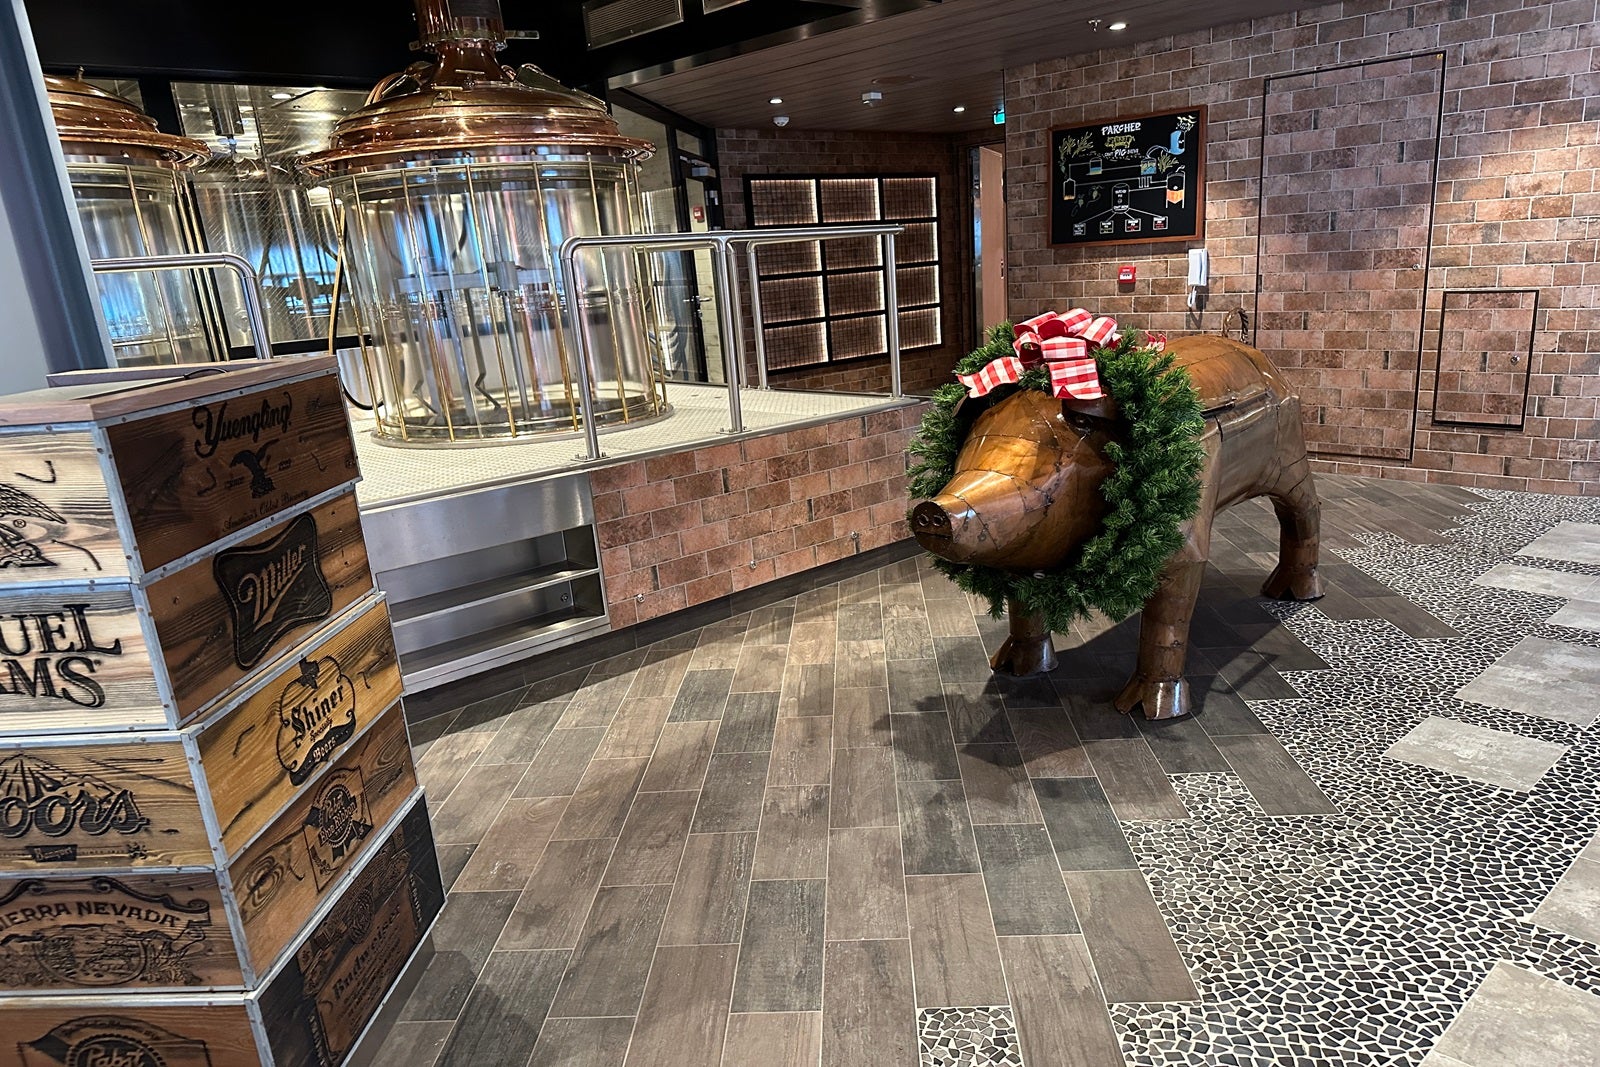 A metal pig sculpture with a holiday wreath around its neck stands near a check-in podium for a barbecue restaurant